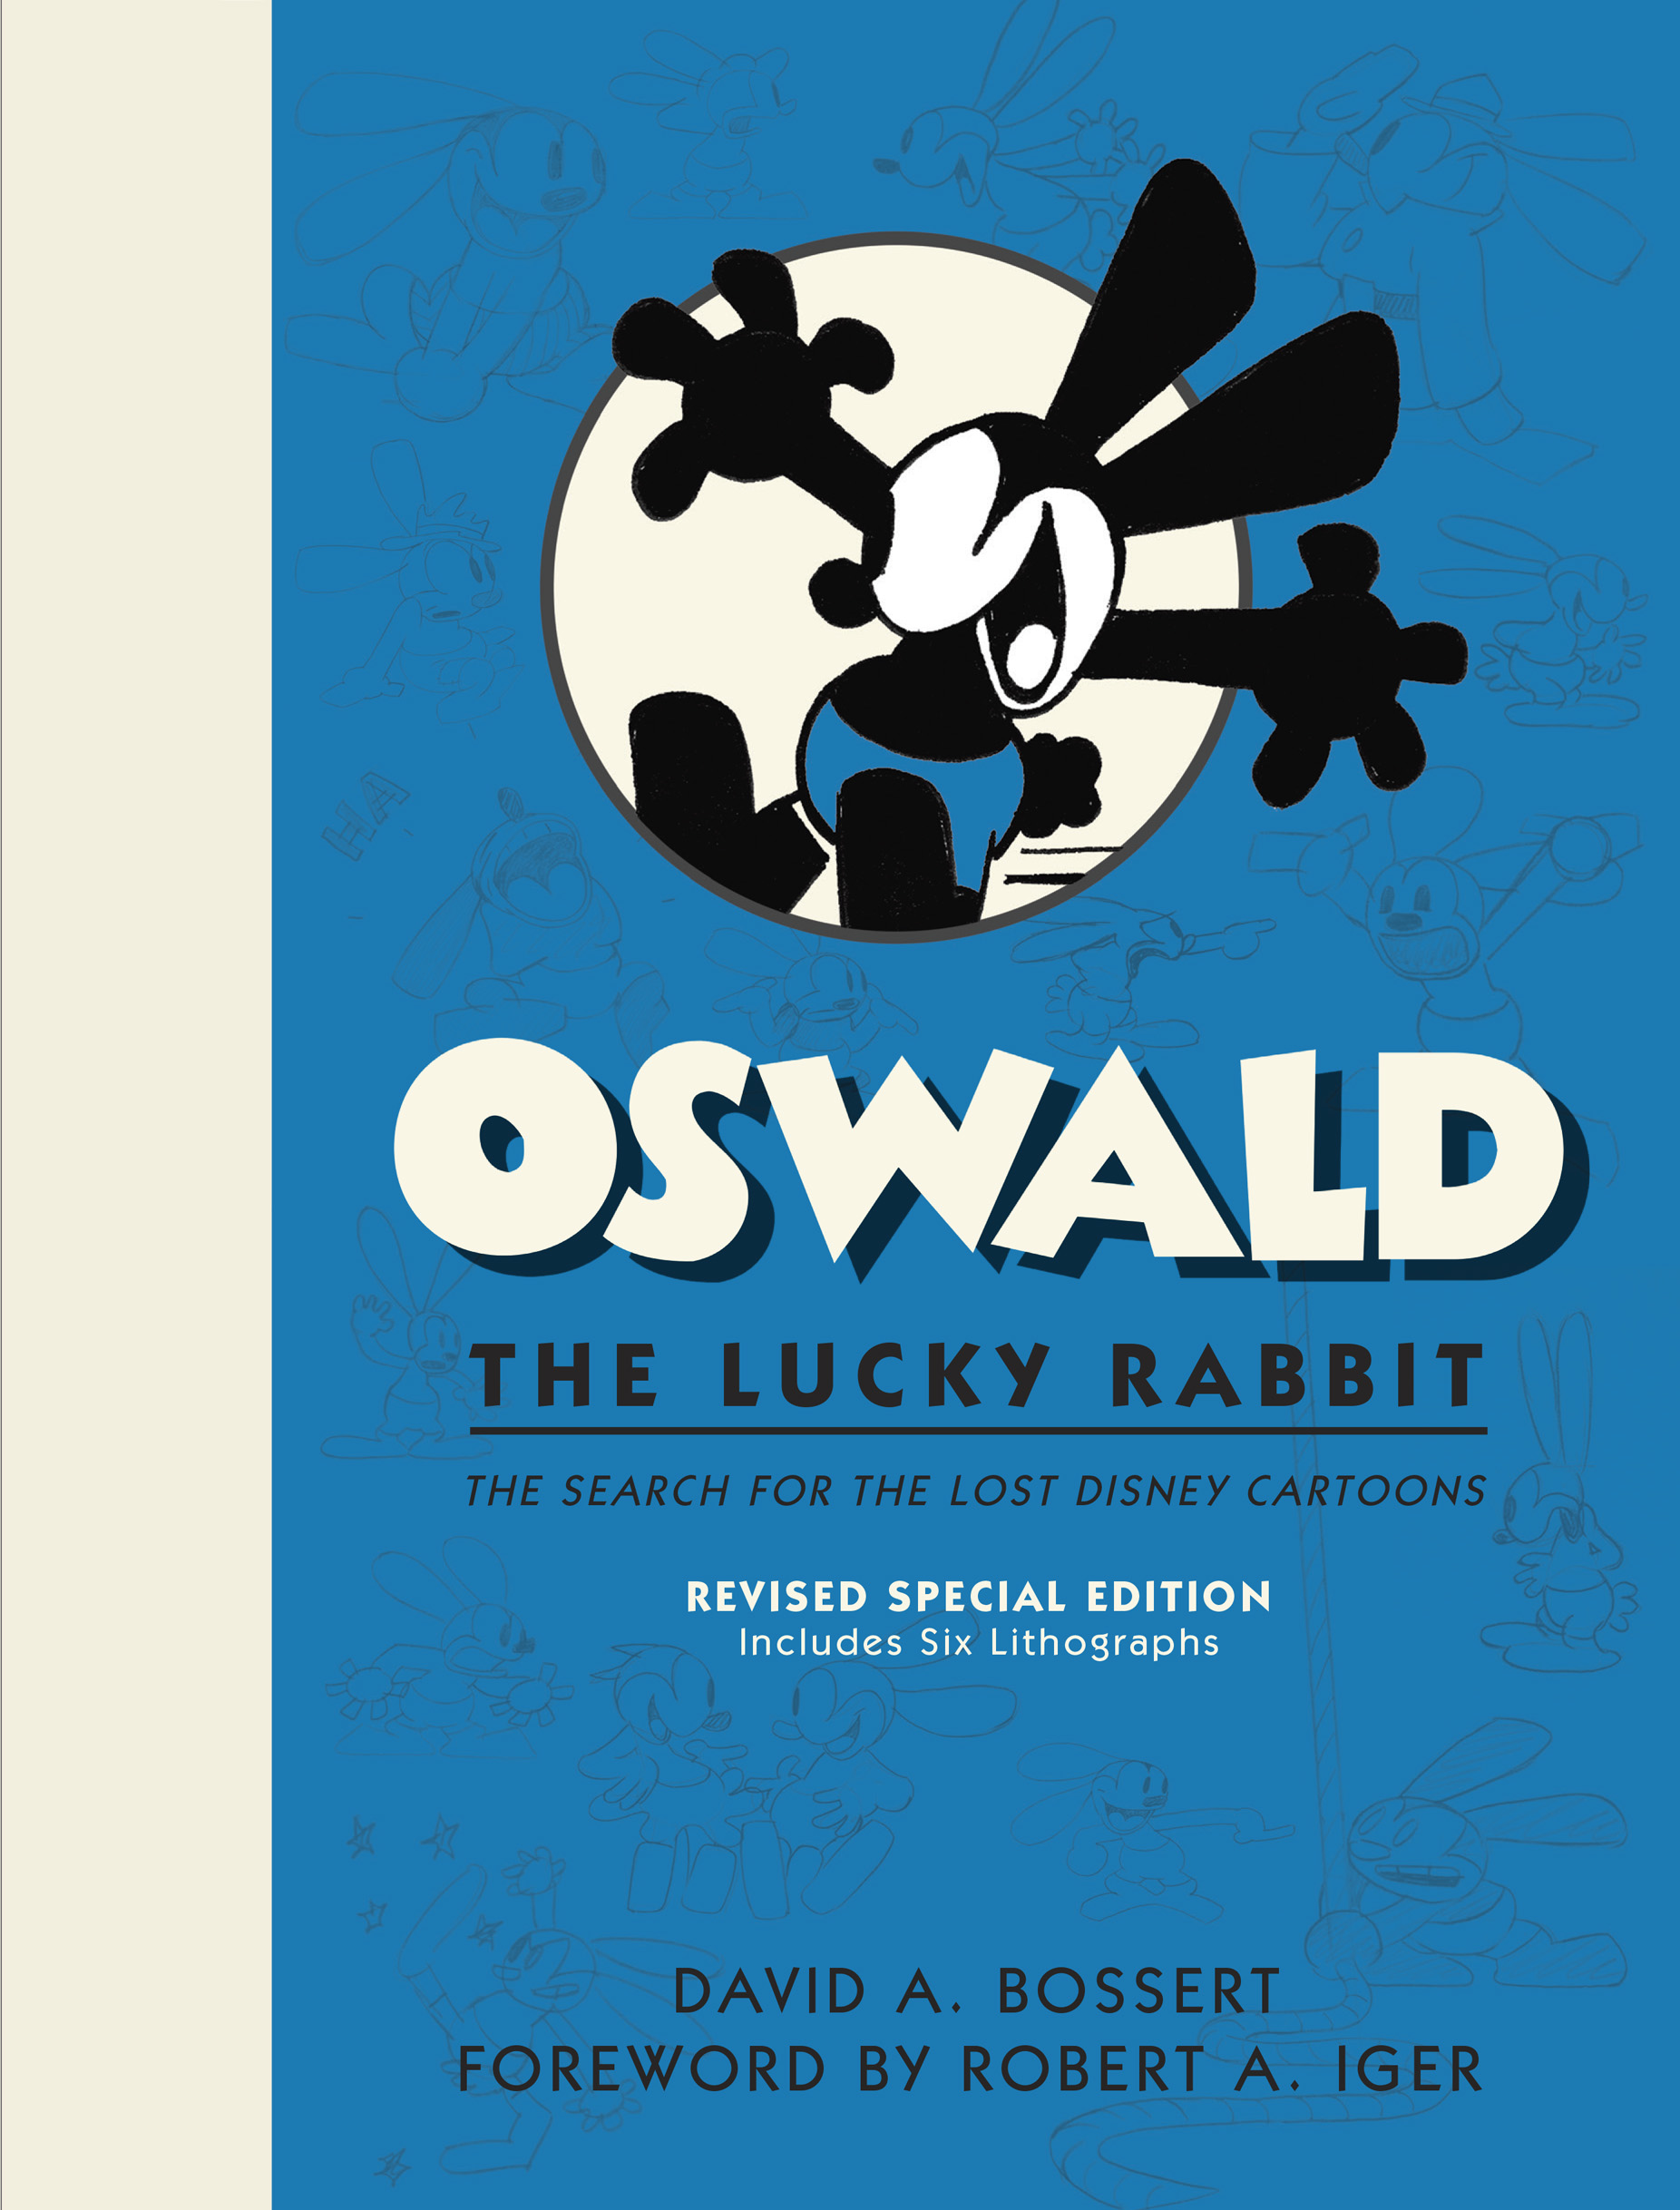 Oswald the Lucky Rabbit: The Search for the Lost Disney Cartoons, Limited  Edition by David A. Bossert - Disney, Oswald the Lucky Rabbit, Walt Disney  Studios Books